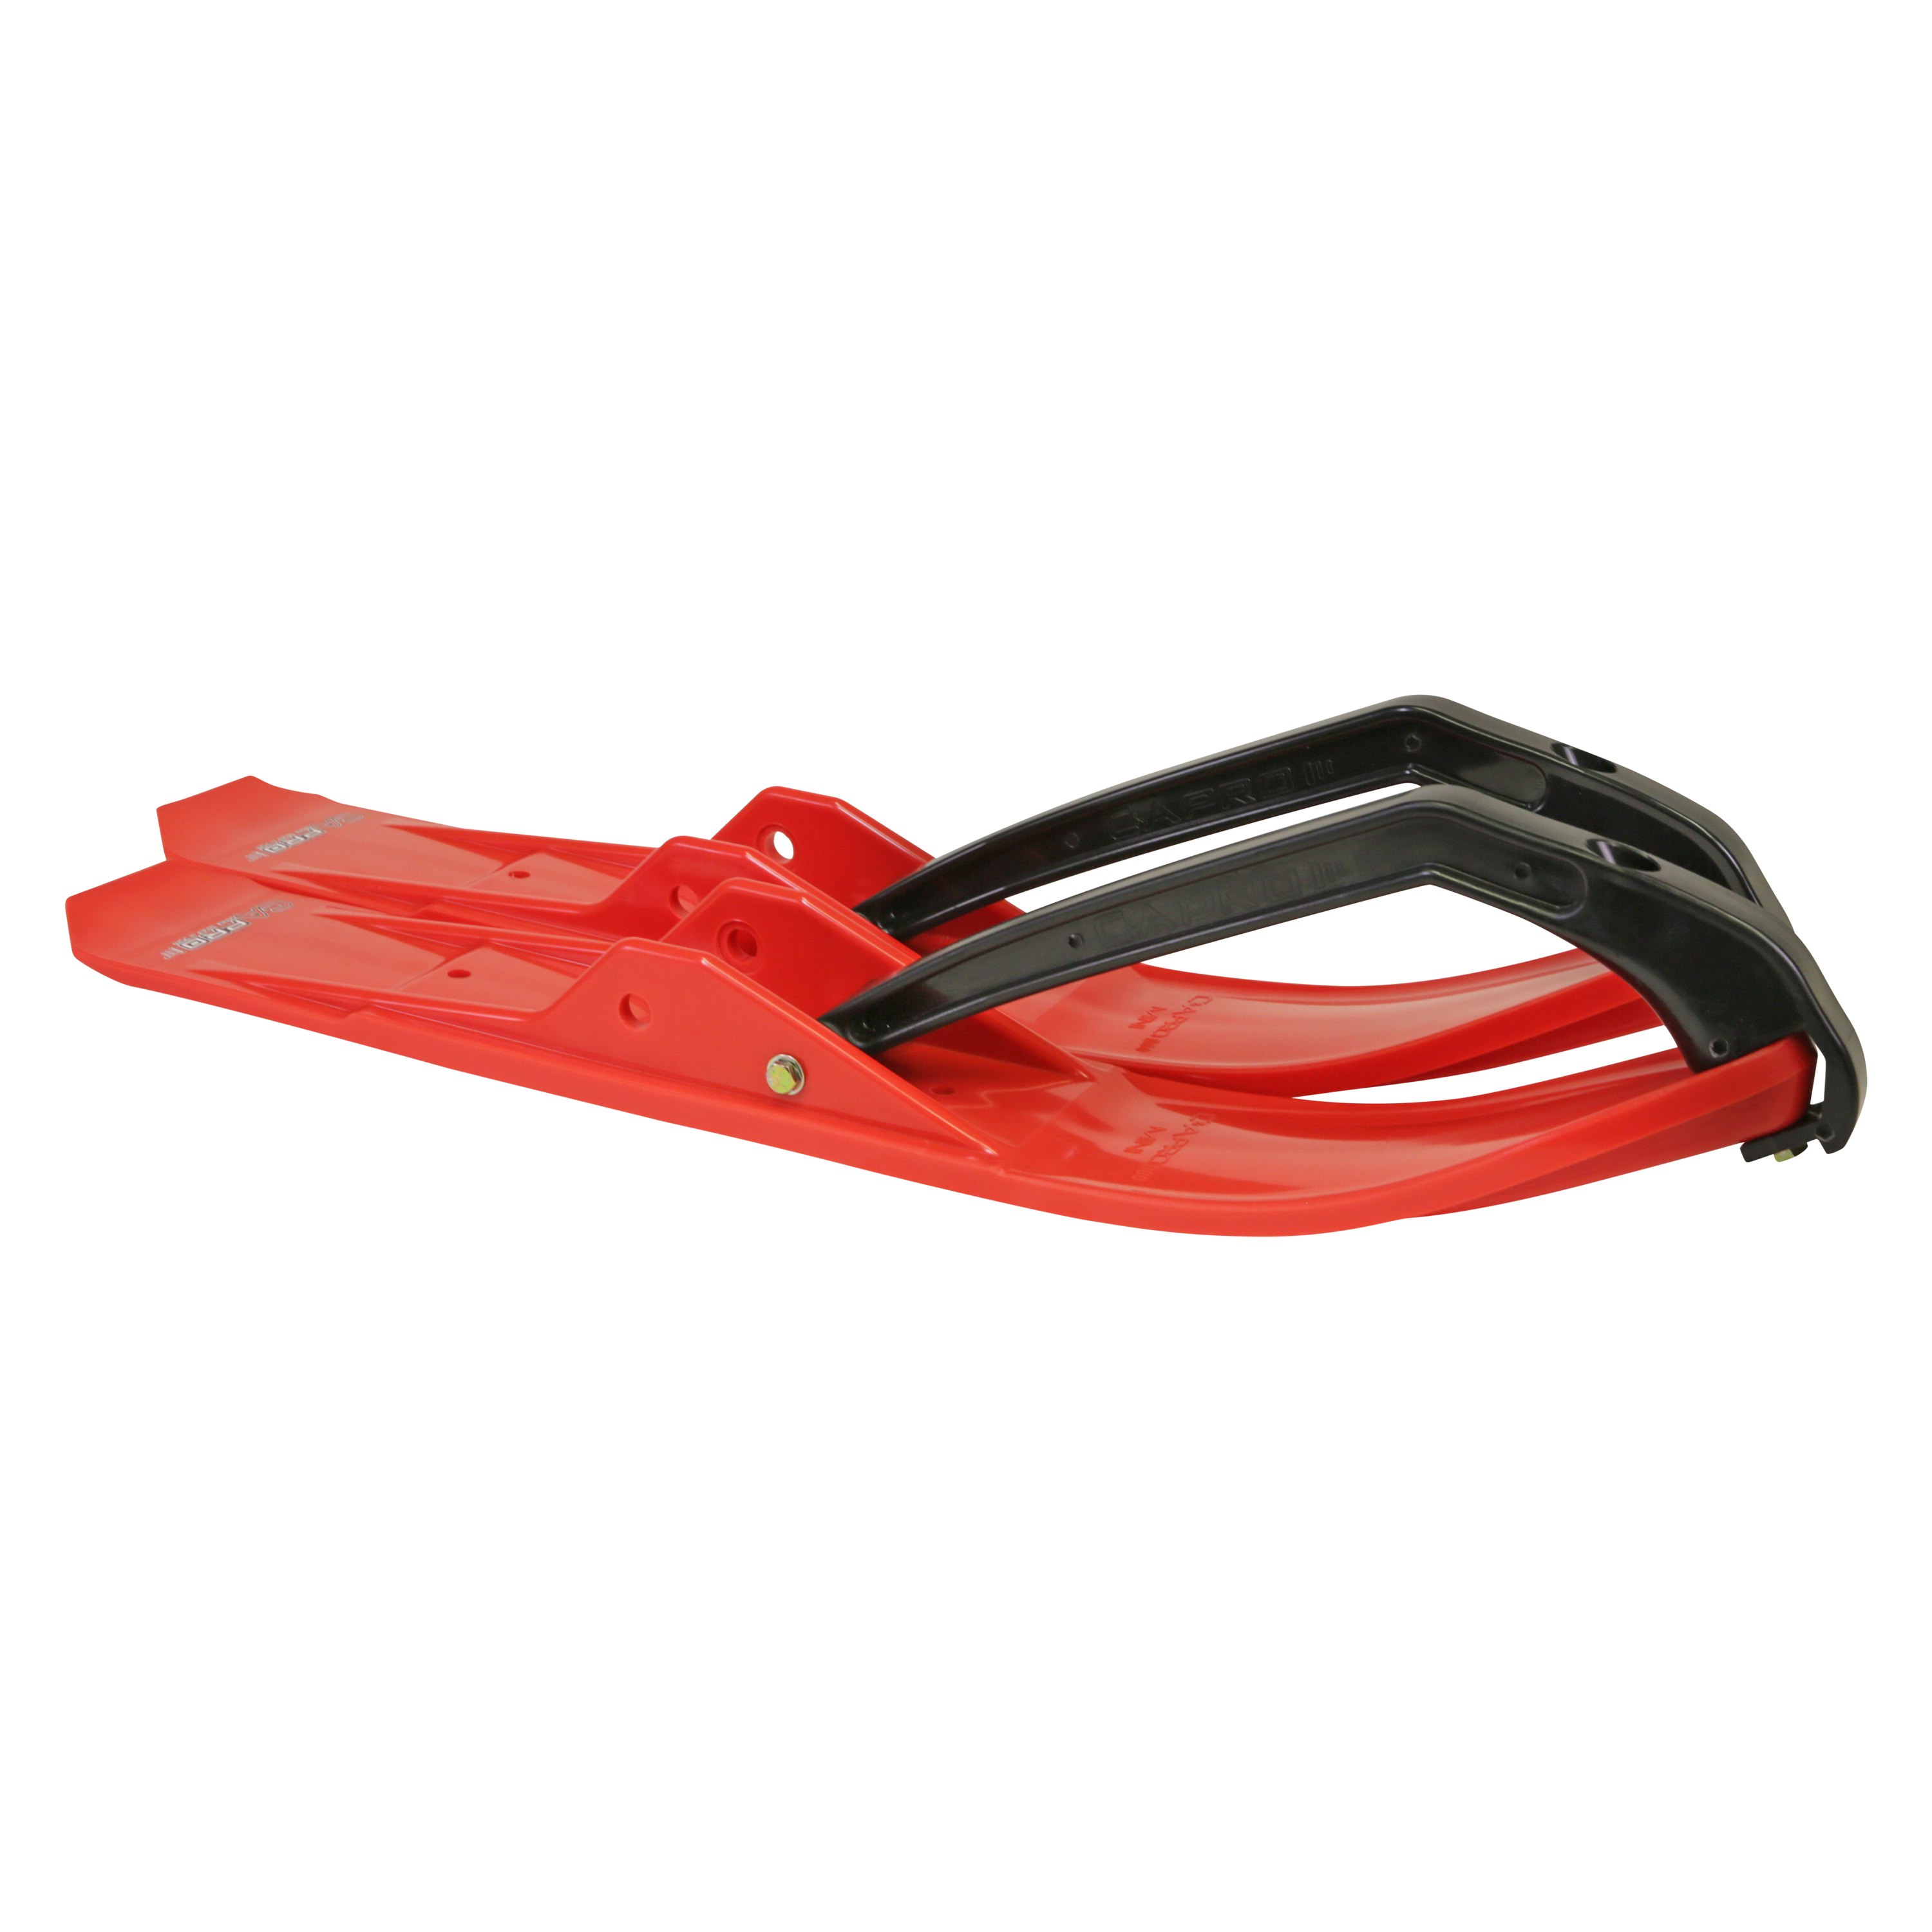 C A MINI PRO SKIS RED RED 77050007